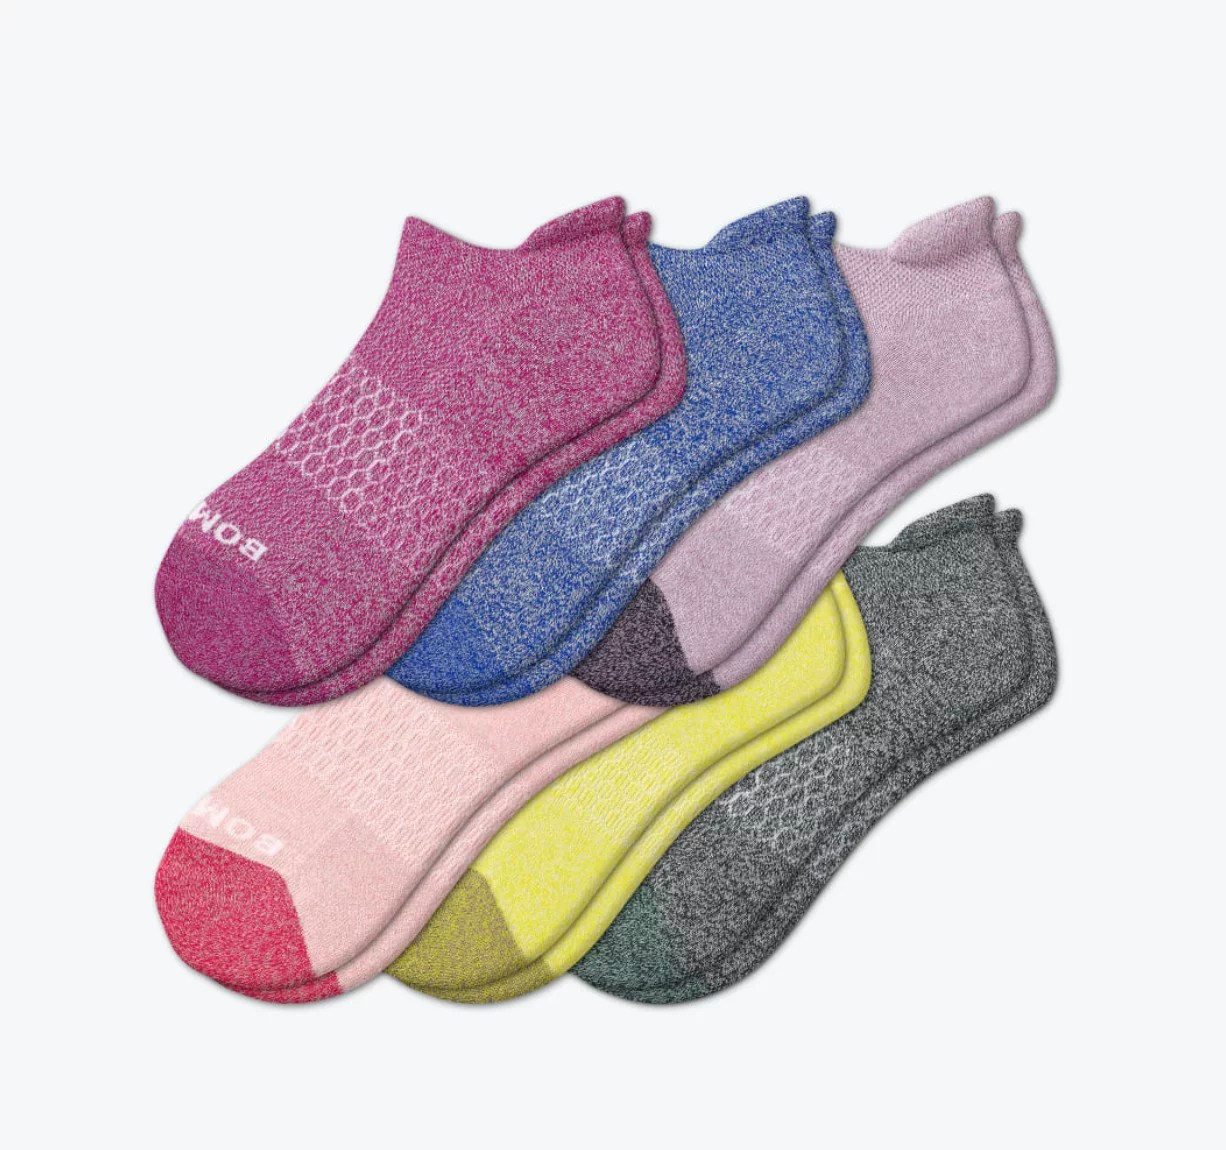 bombas socks 6 pack in purple, blue, lavender, pink, yellow and gray colors